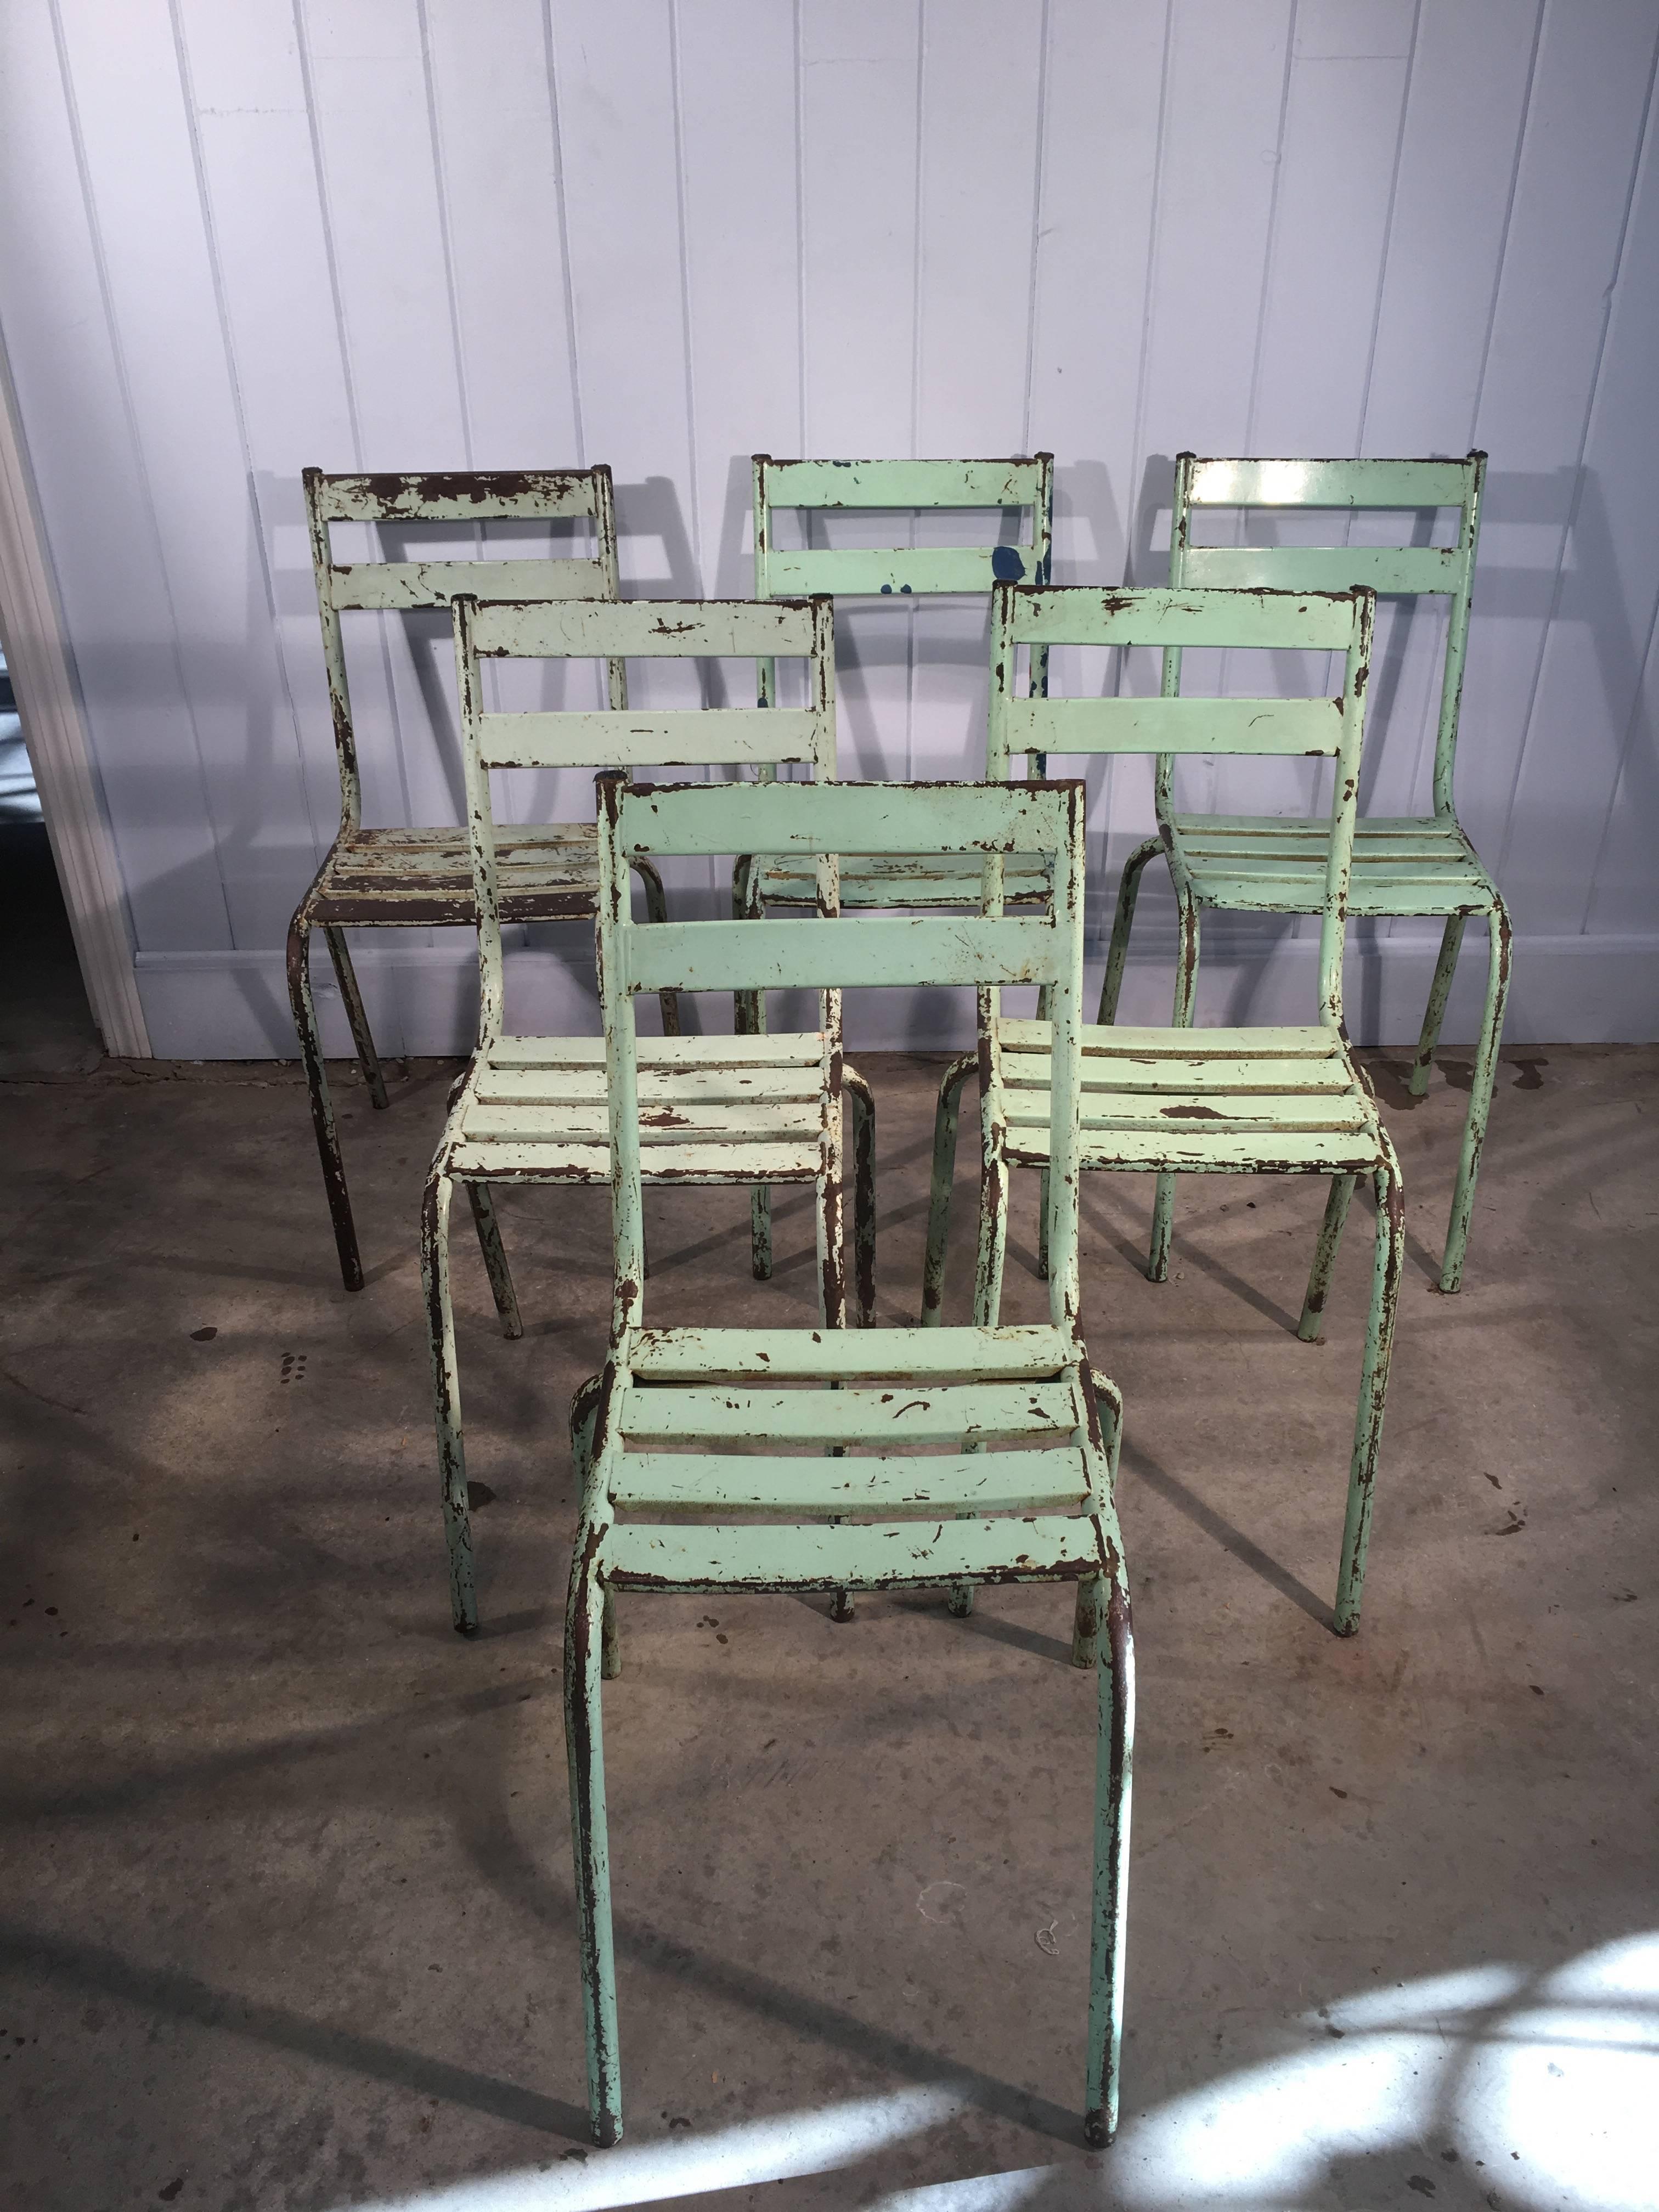 We love these sturdy steel garden chairs with their mixed patina of green paint and a bit of rust. Their clean lines work with everything and they are so comfortable. They also stack, so take up very little room should you choose to store them when